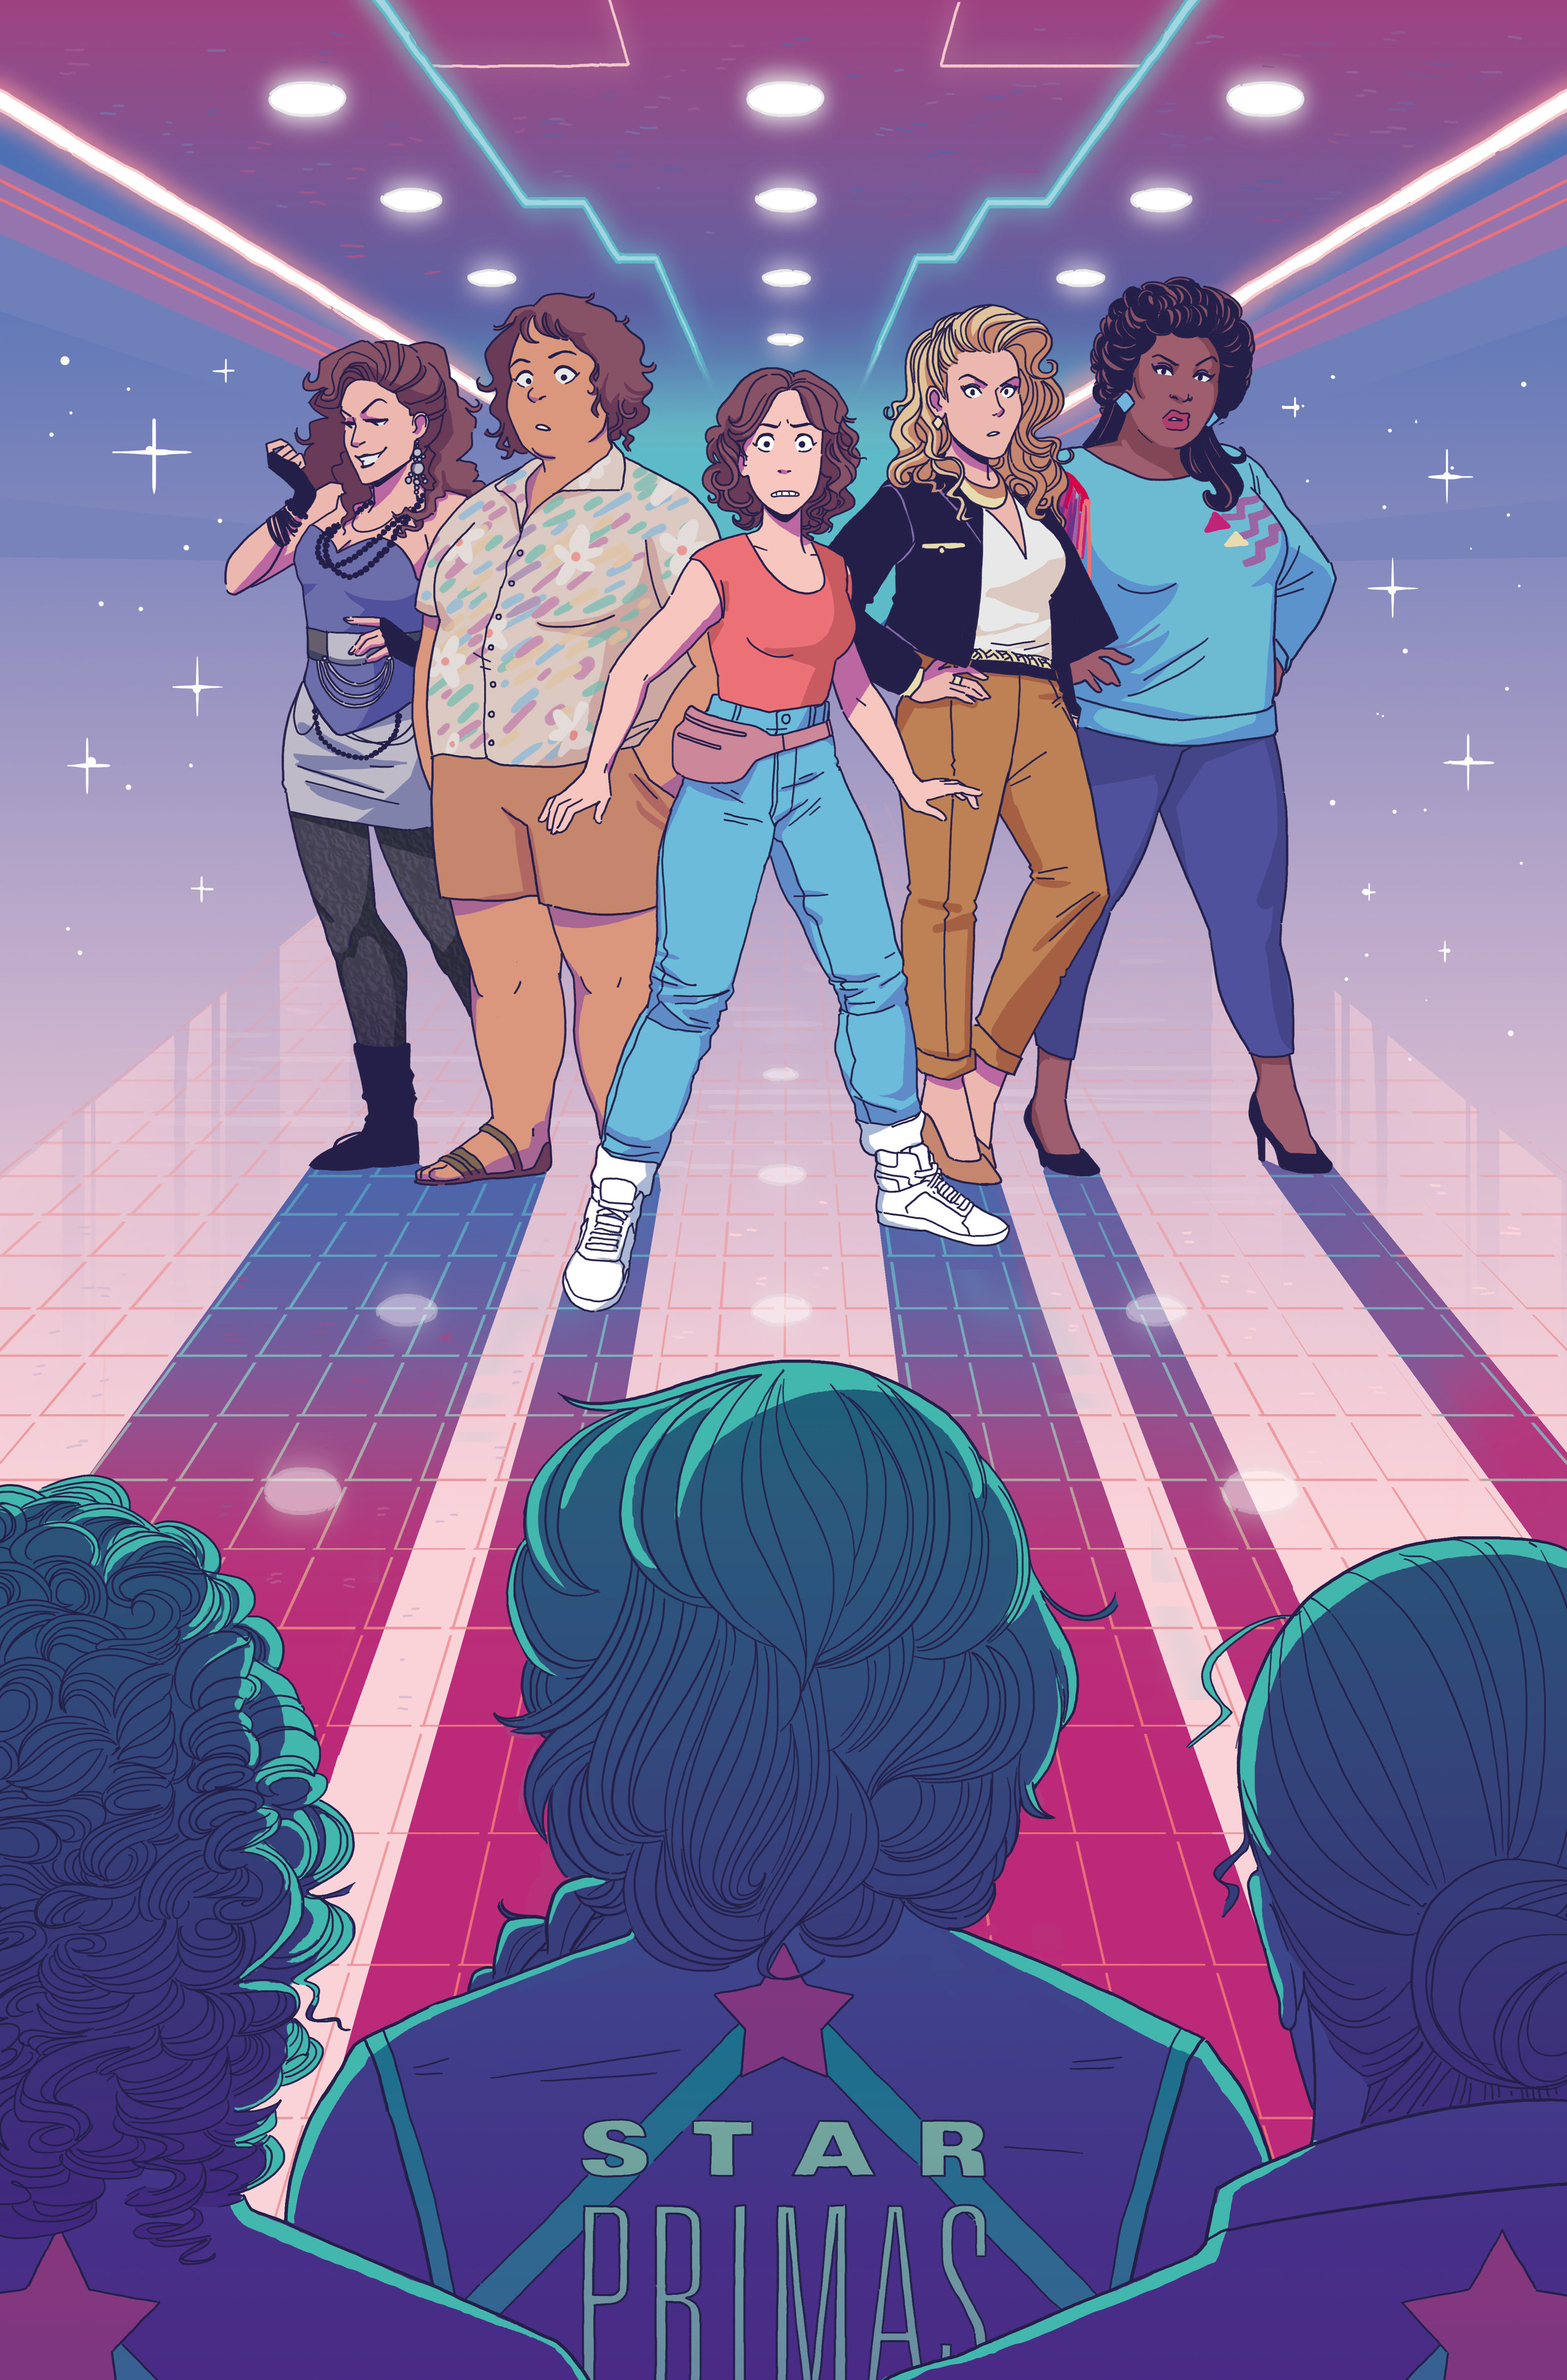  Cover  - GLOW #2  - IDW 